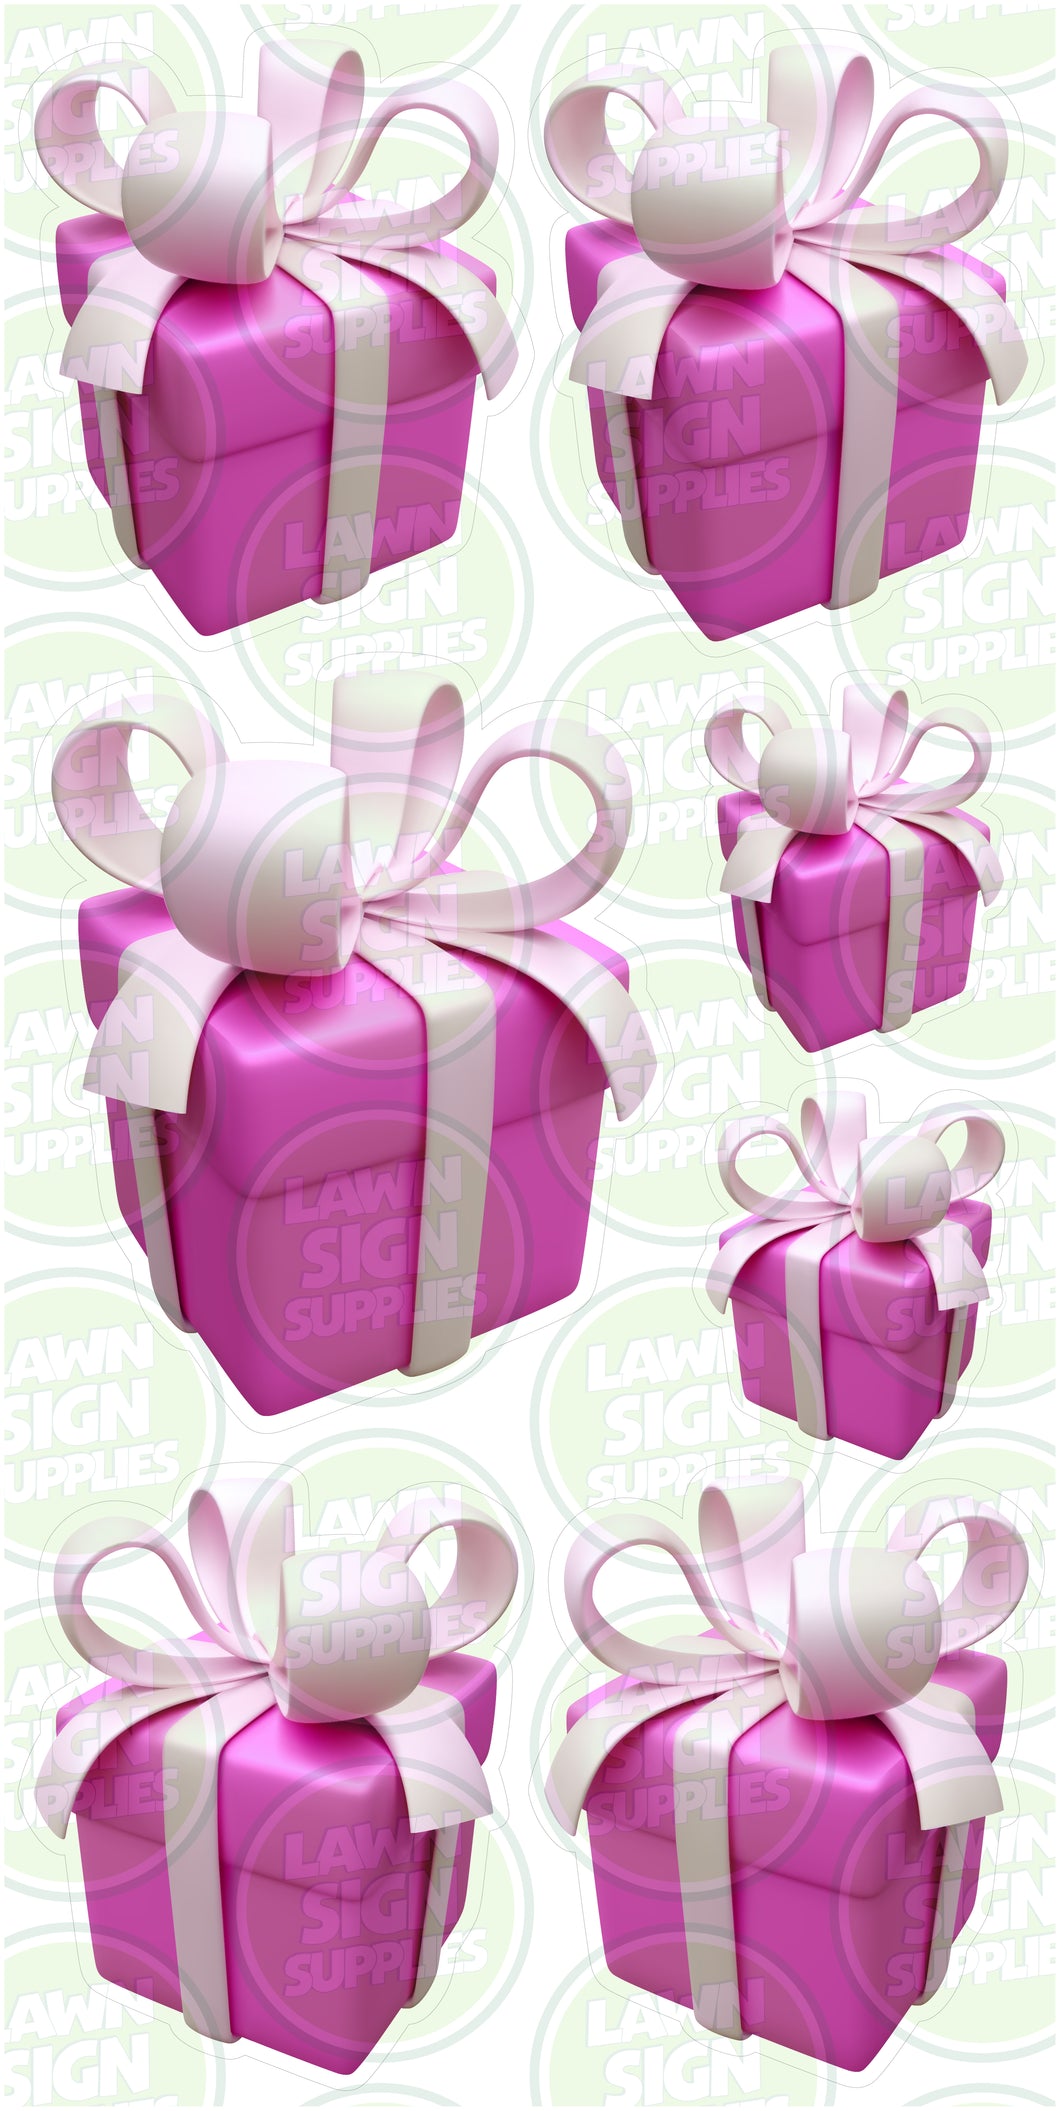 PINK GIFT BOXES